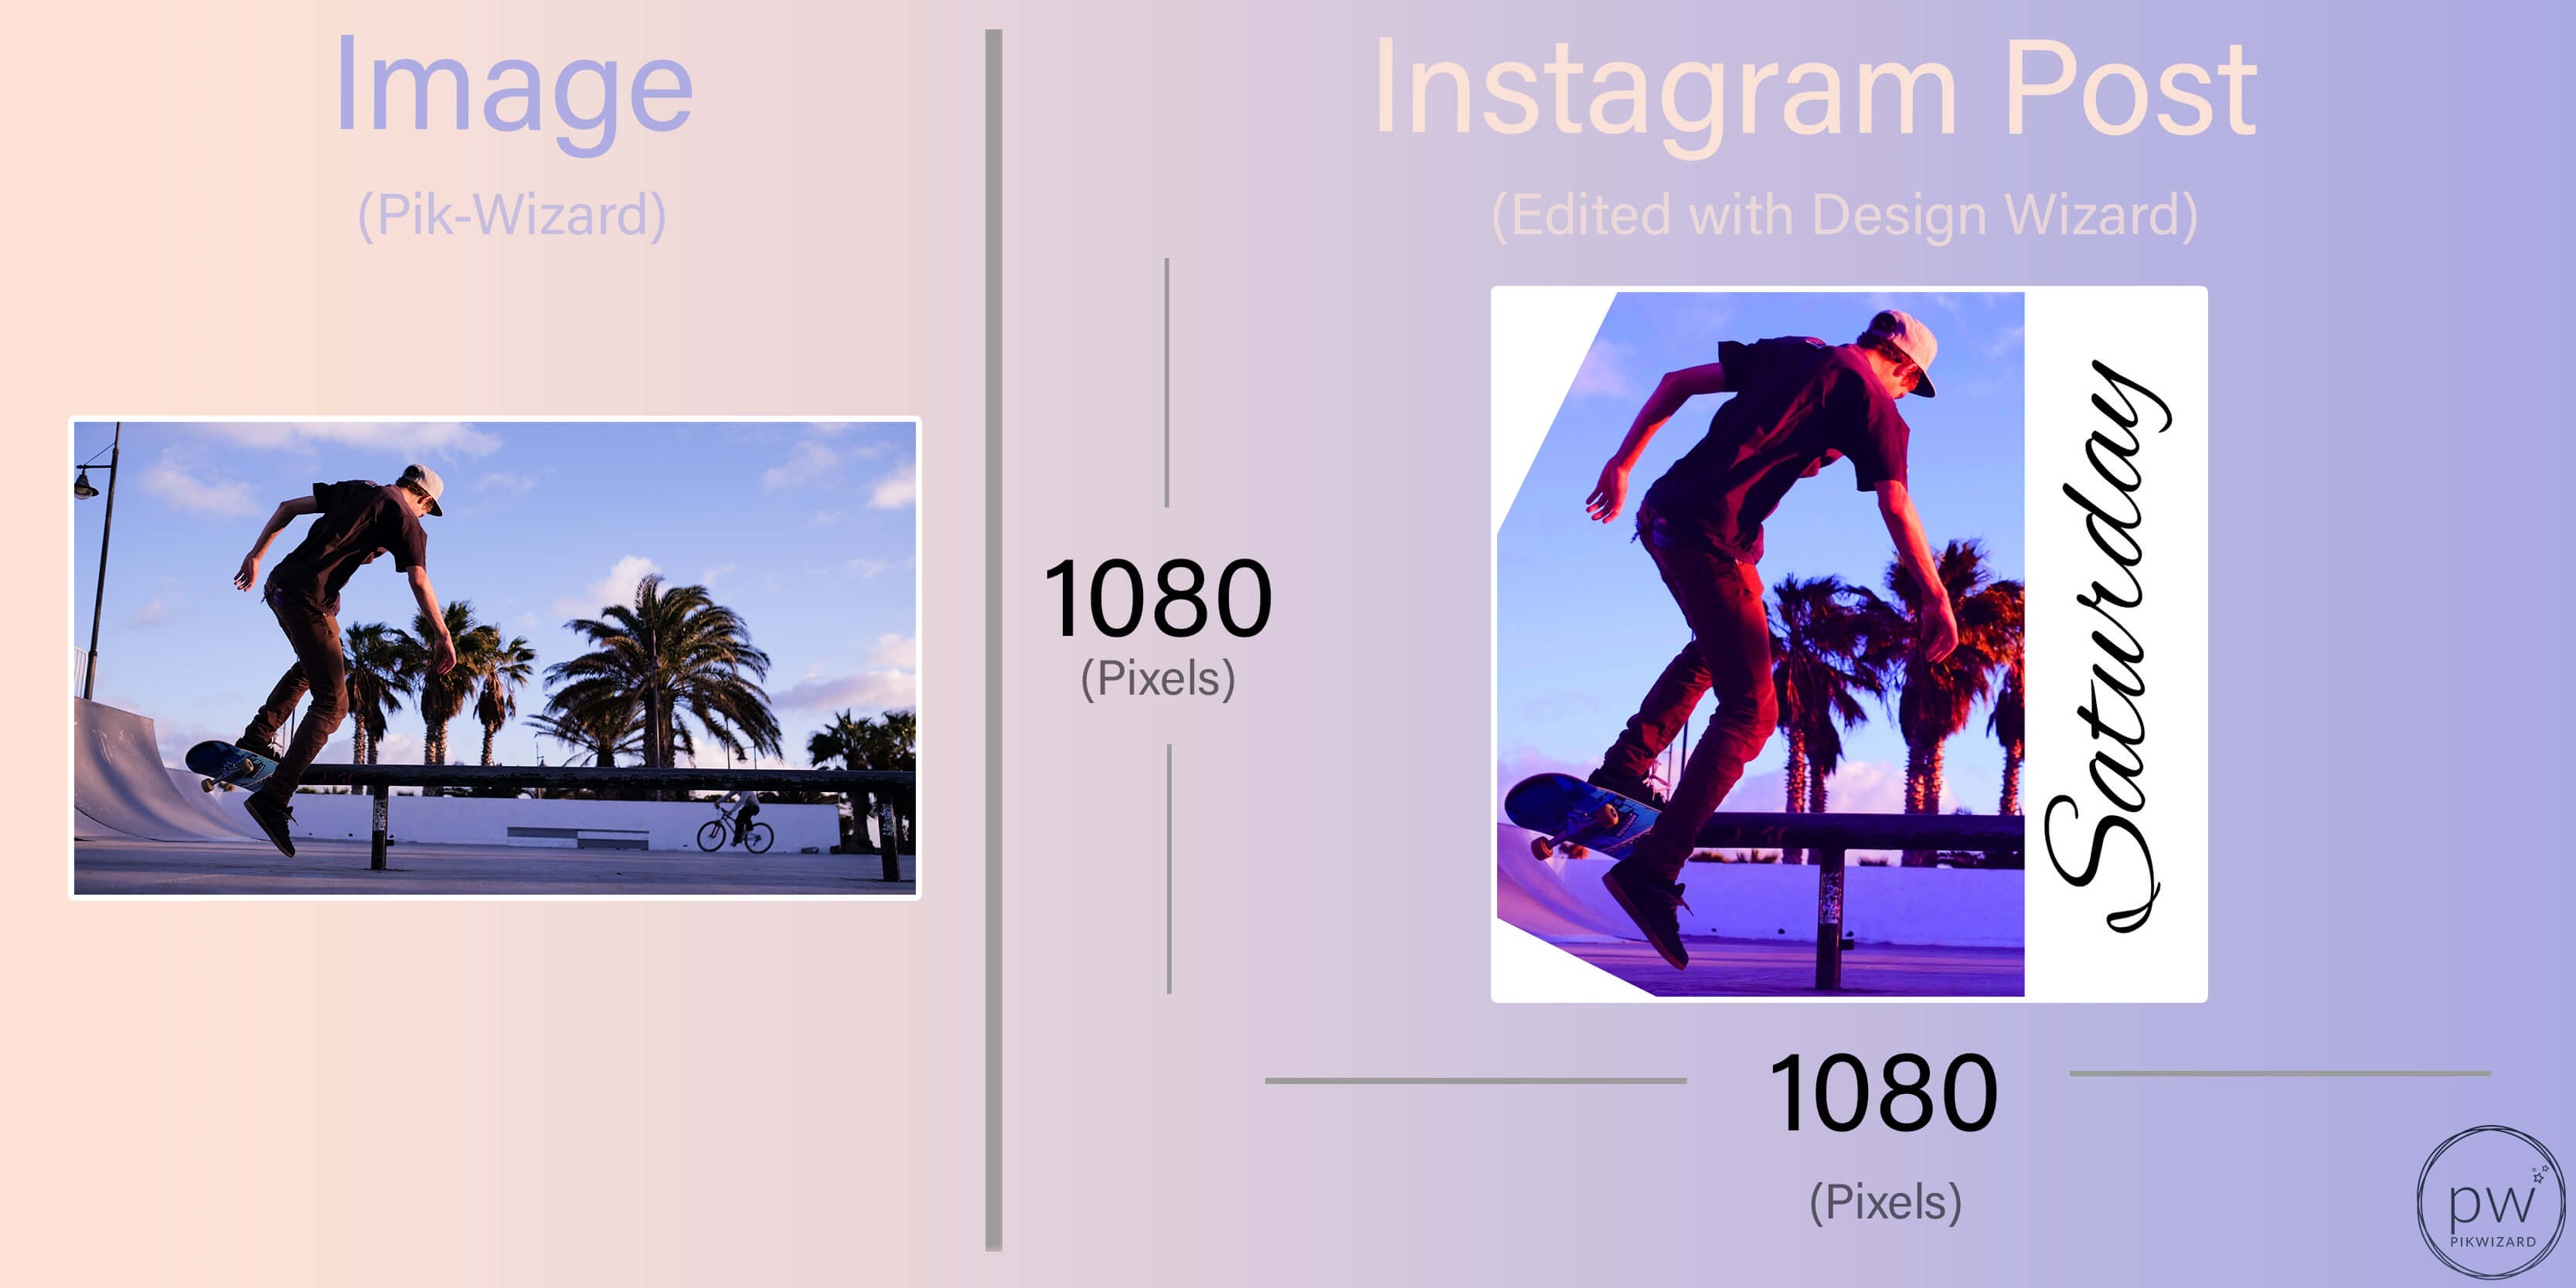 Side by side stock image and edited instagram post of lifestyle skateboarding - A complete beginner's guide on how to post on Instagram from a PC or Mac - Image